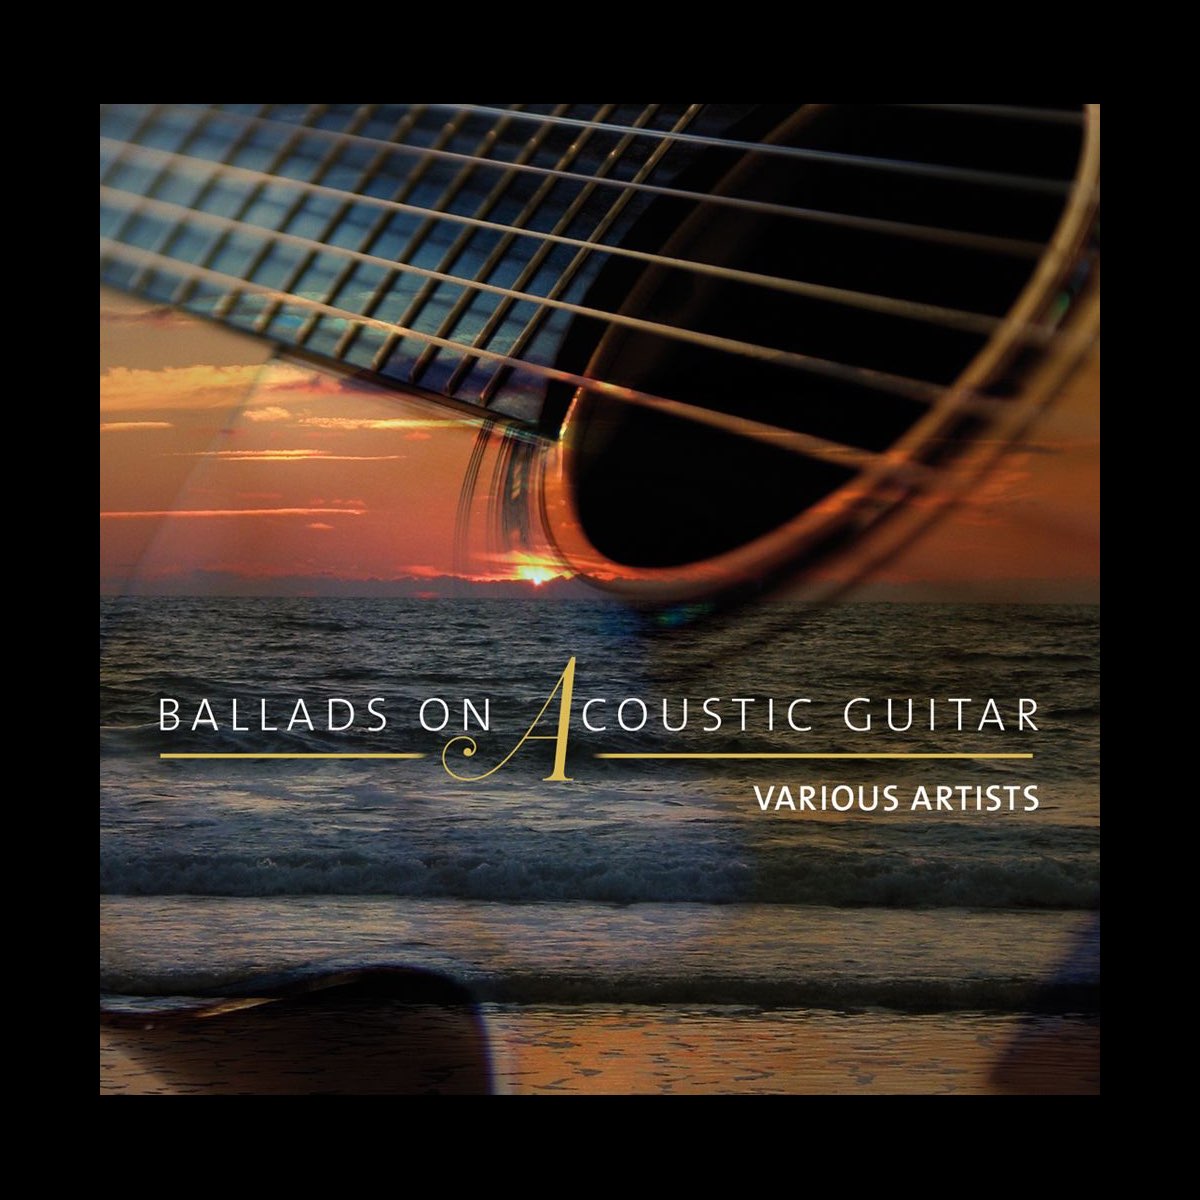 Ballads On Acoustic Guitar by Various Artists on Apple Music